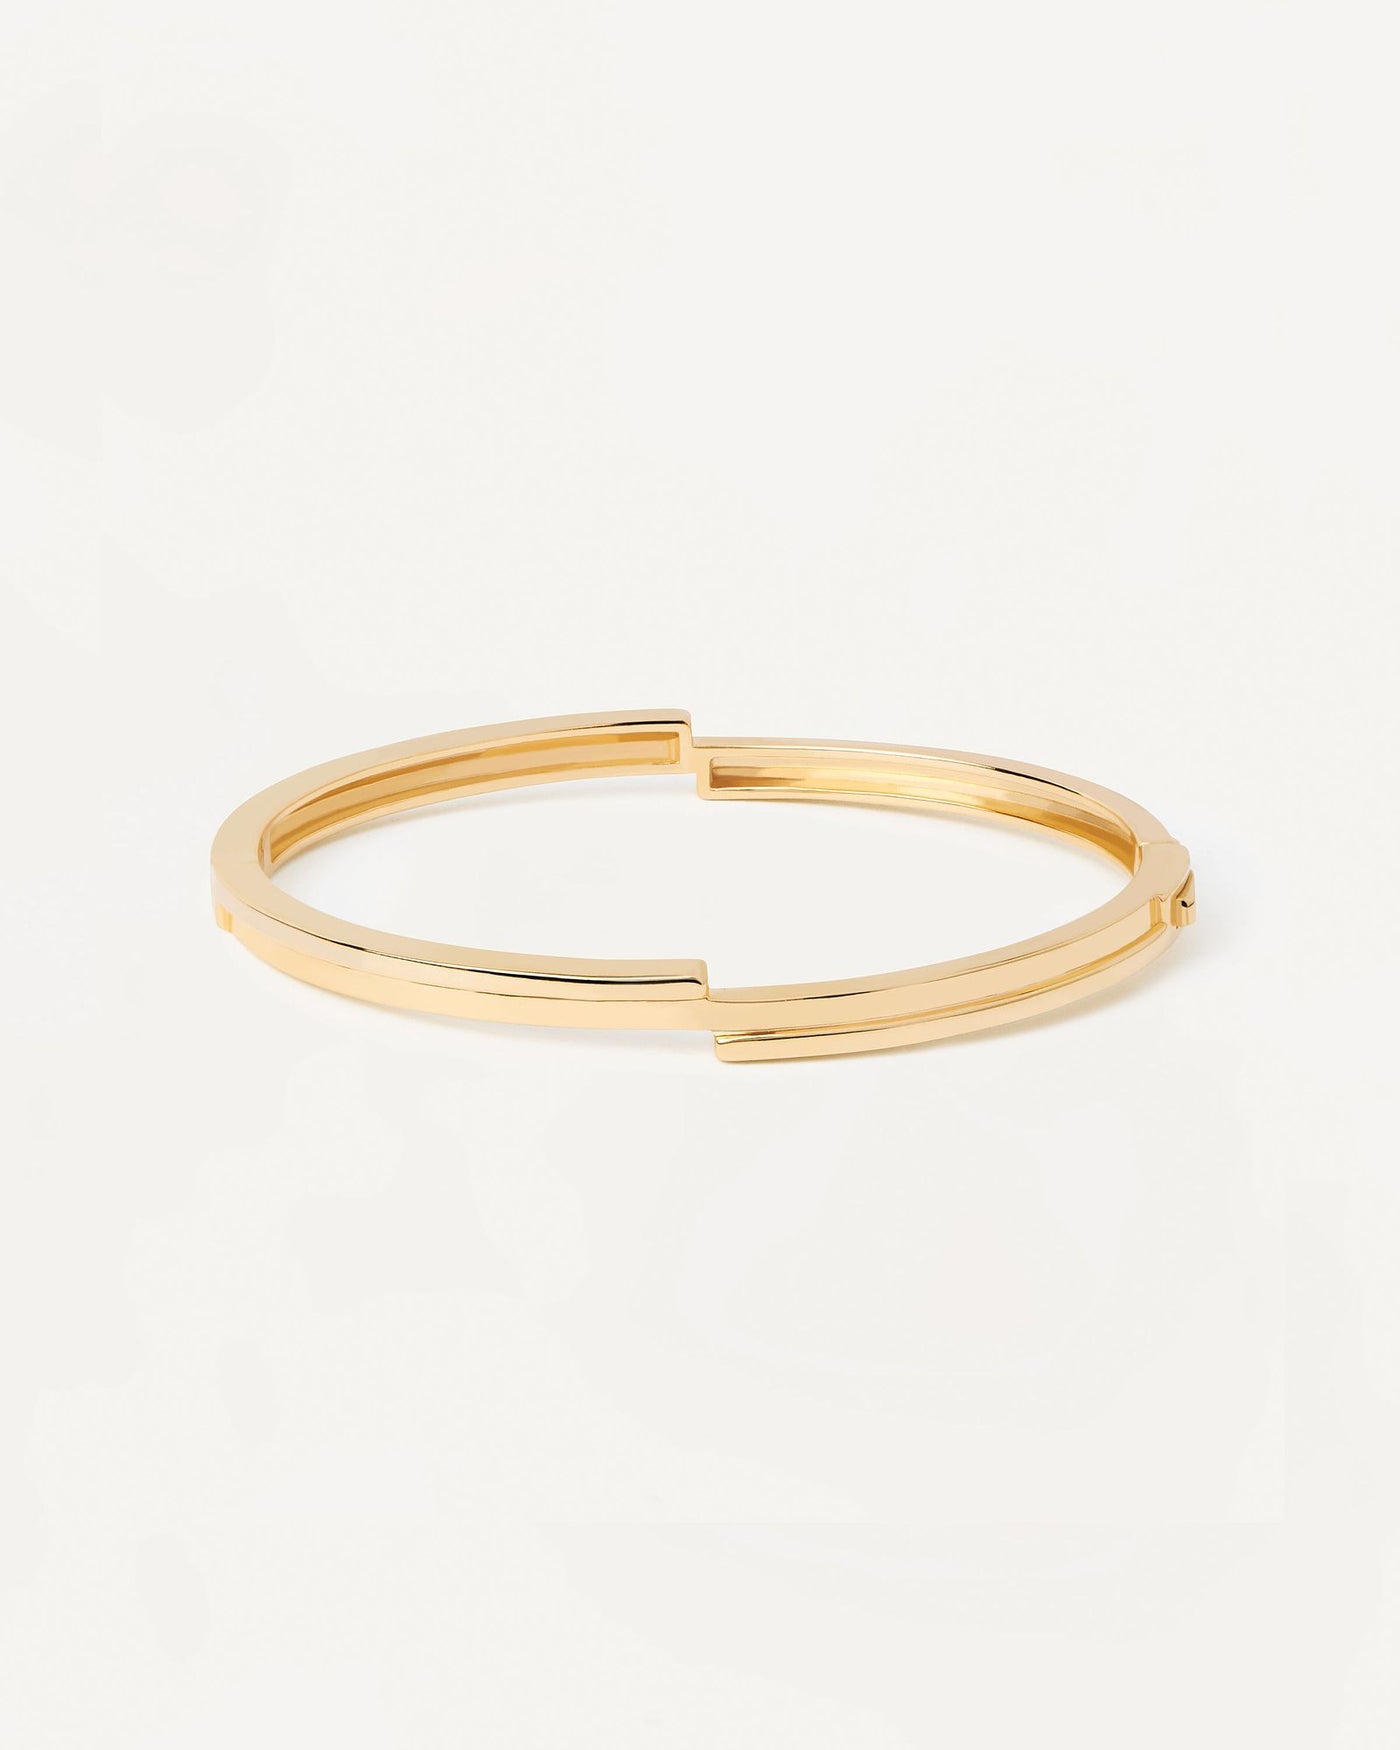 2024 Selection | Genesis Bangle. Hinged rigid bracelet with asymetric design in gold-plated silver. Get the latest arrival from PDPAOLA. Place your order safely and get this Best Seller. Free Shipping.